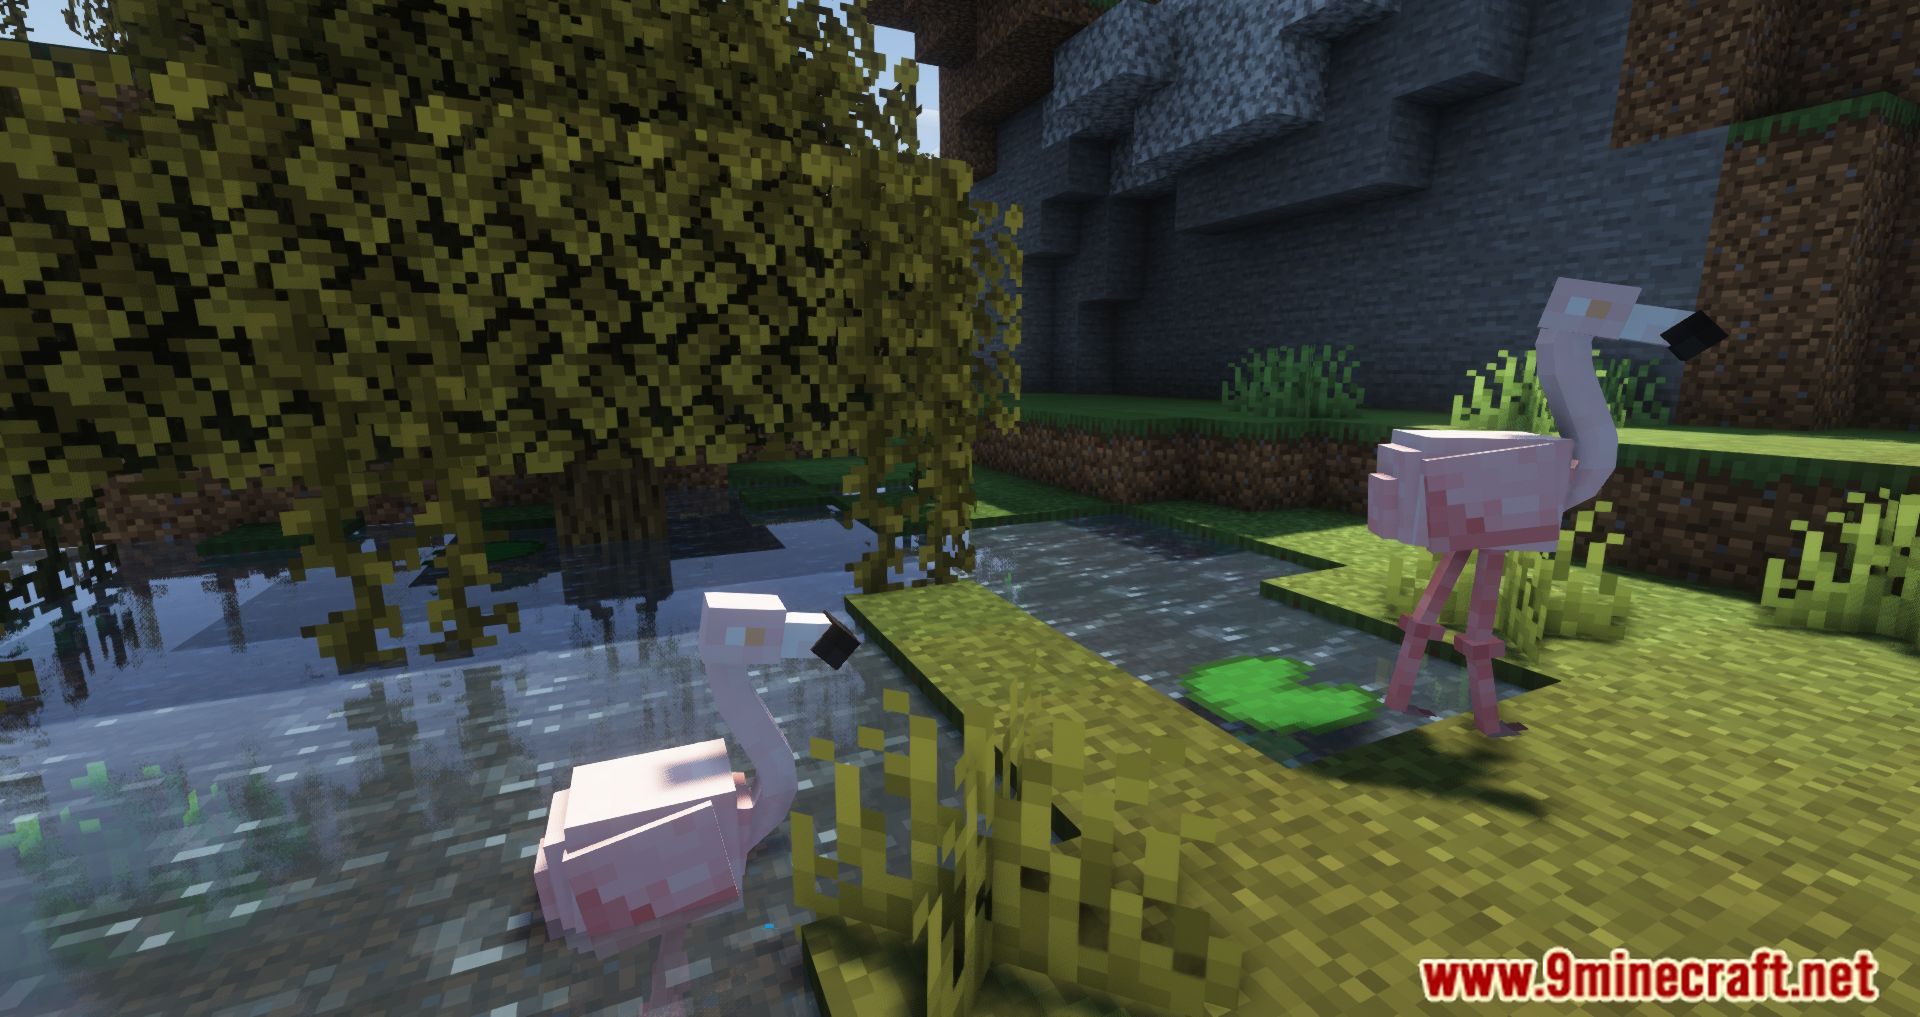 Flamingo, oh, oh, oh Mod (1.16.5, 1.15.2) - Lovely Creature With Pink Color 7